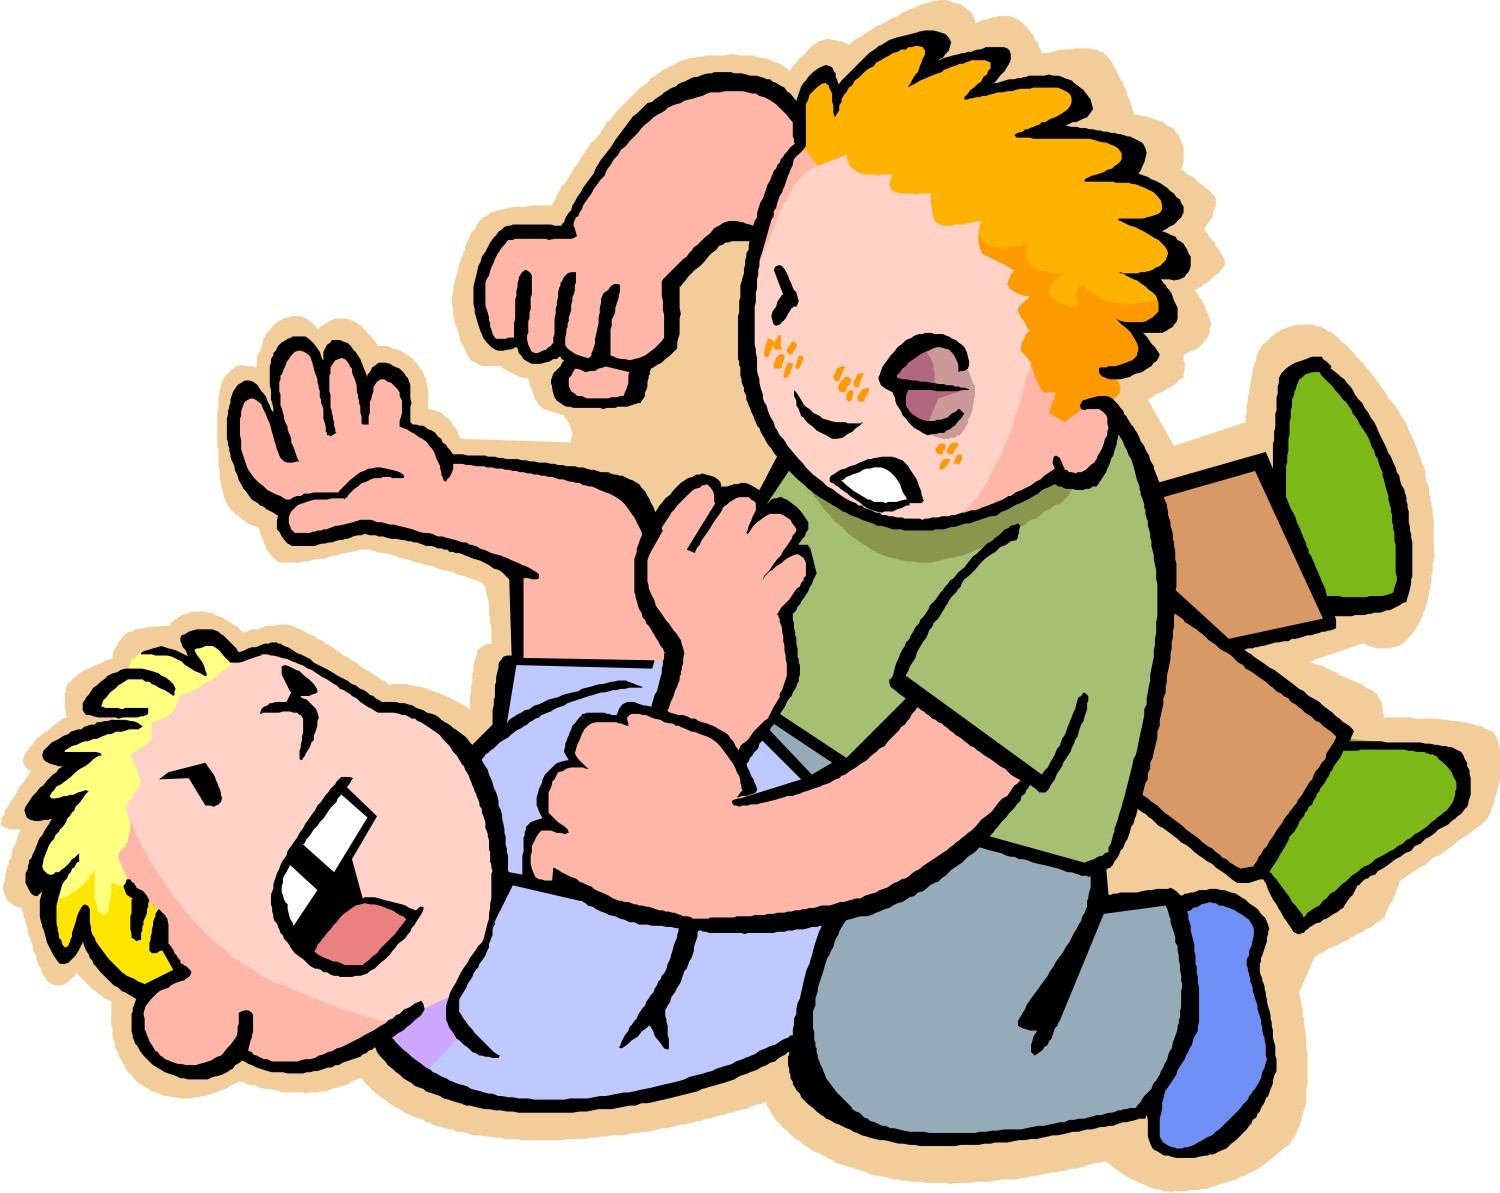 Cartoon Pictures Of People Fighting - ClipArt Best